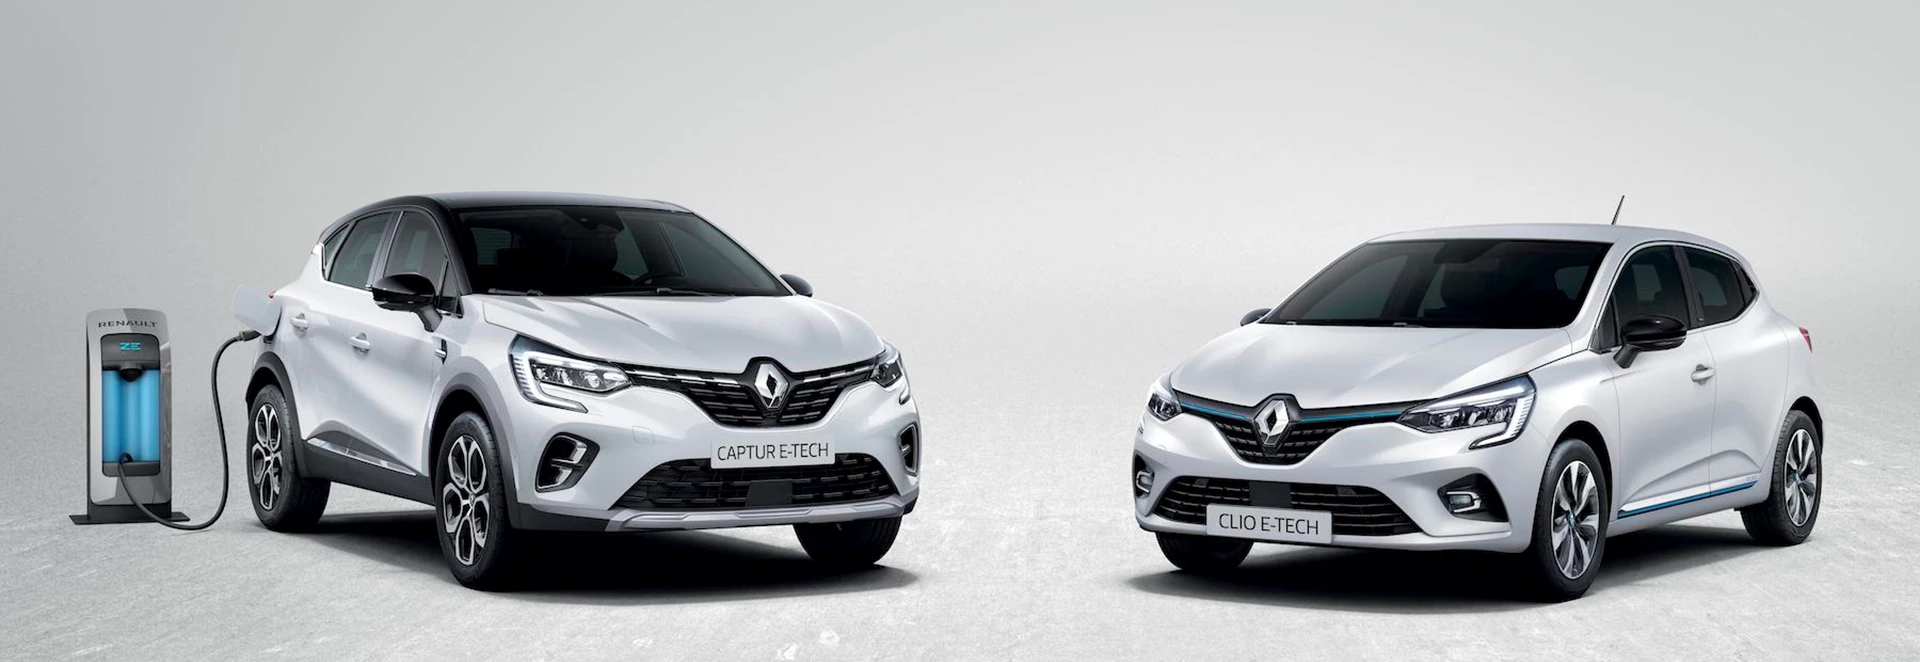 Renault launches new hybrid powertrains for best-selling CLIO and CAPTUR